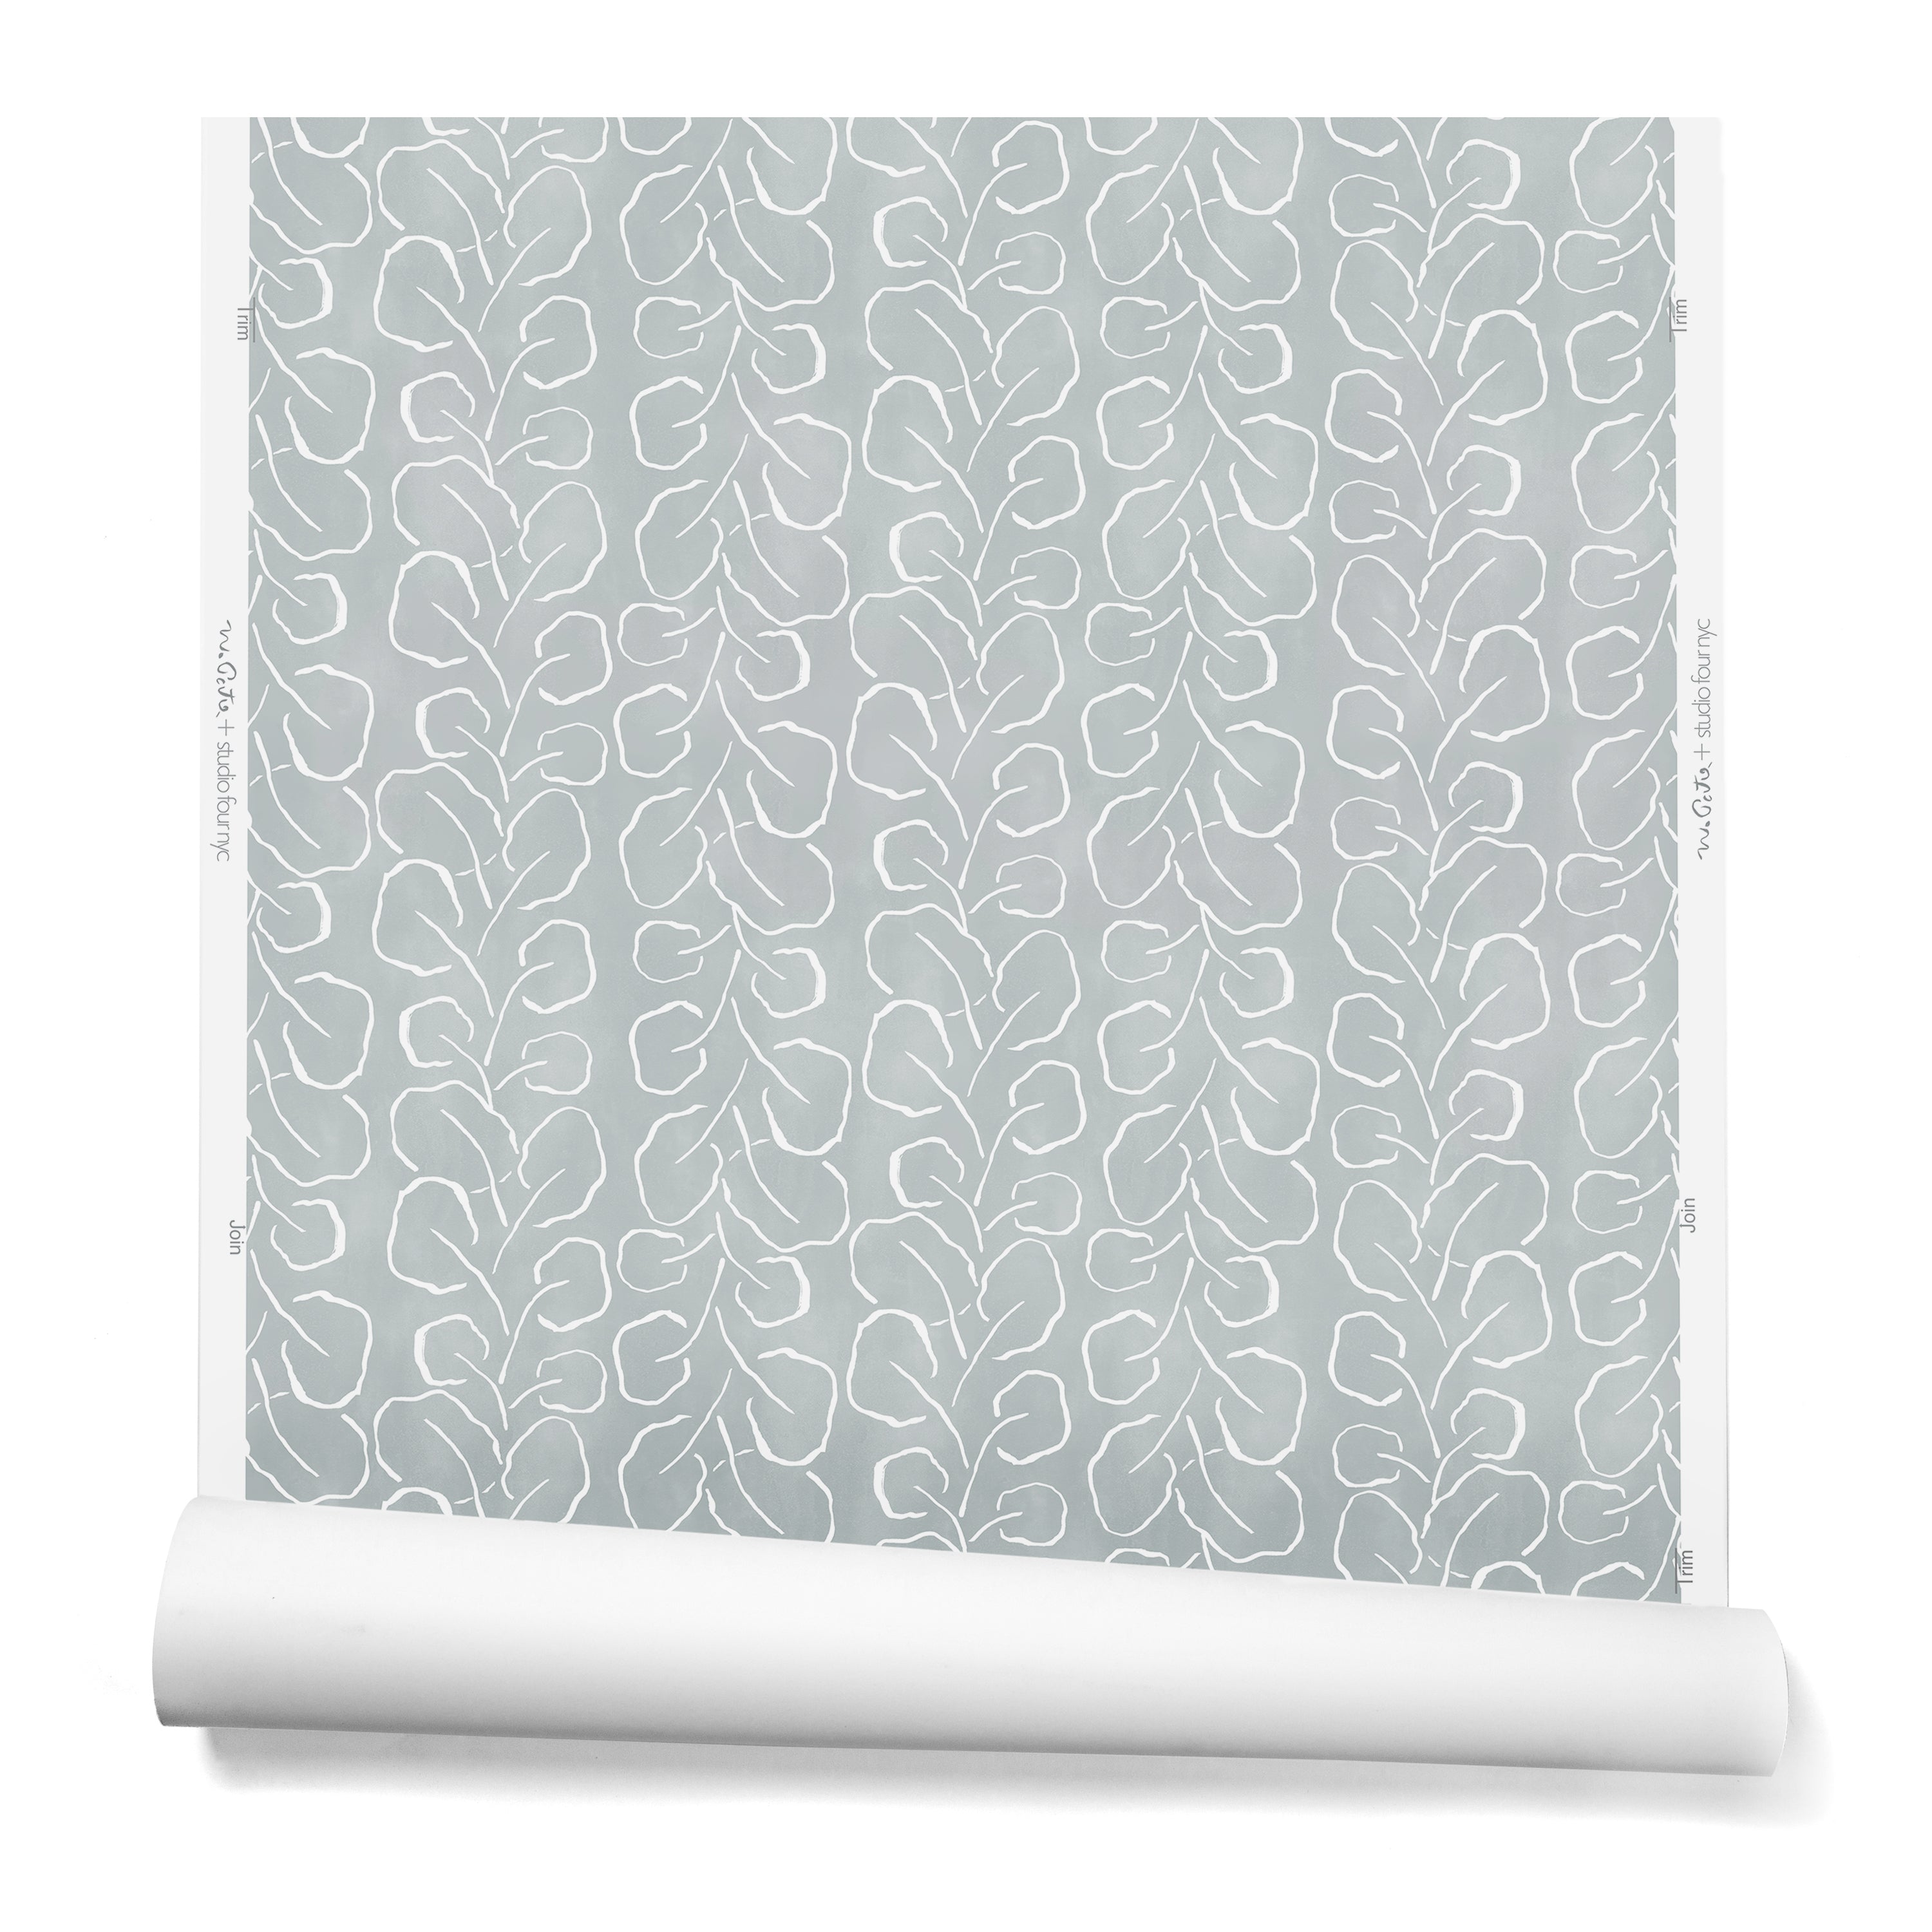 A hanging roll of wallpaper with a large-scale repeating leaf print in white on a blue-gray watercolor background.